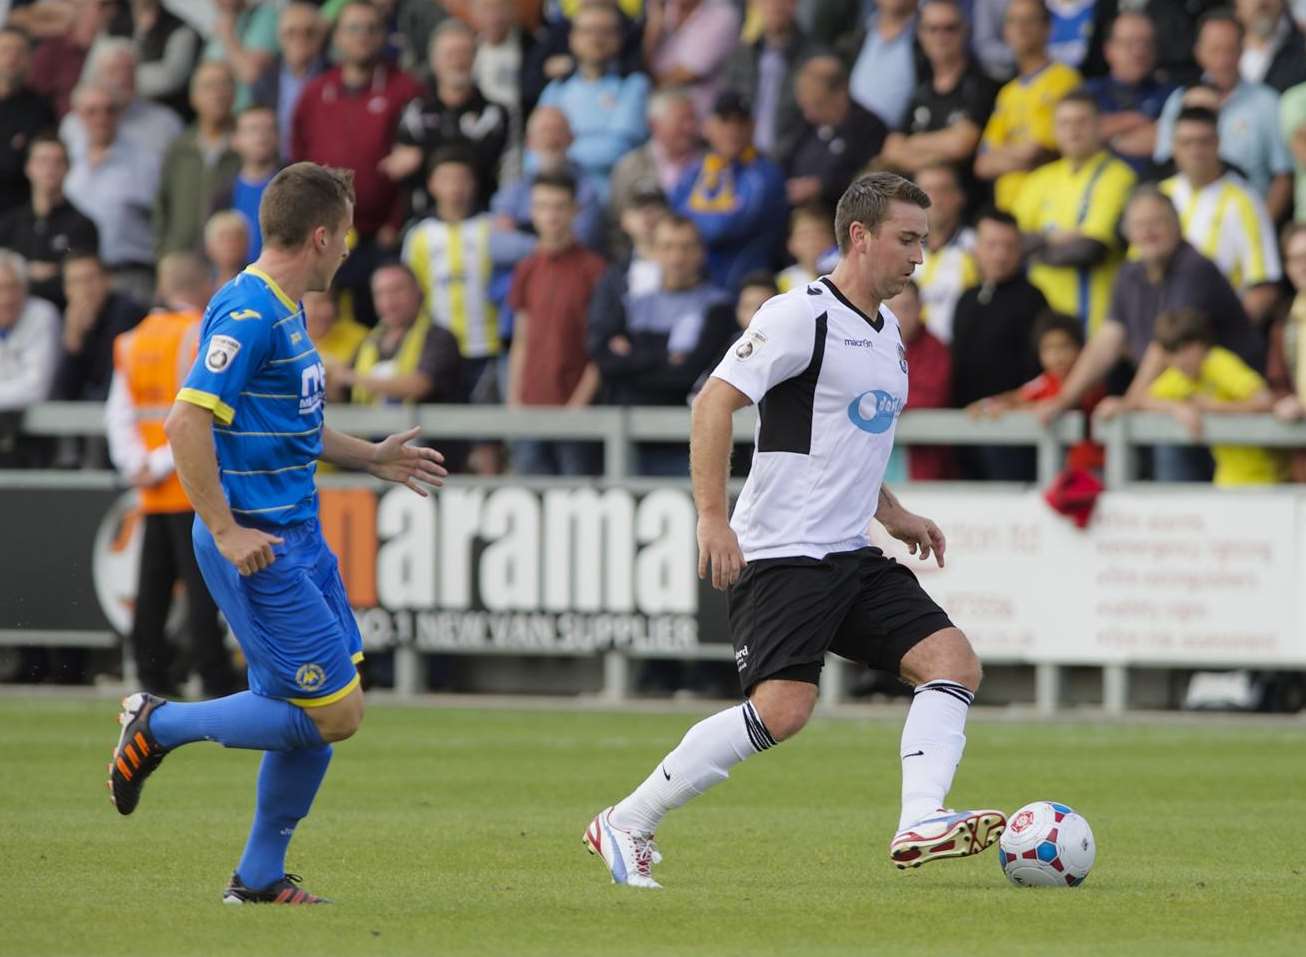 Dartford's Peter Sweeney on the ball against Torquay Picture: Andy Payton